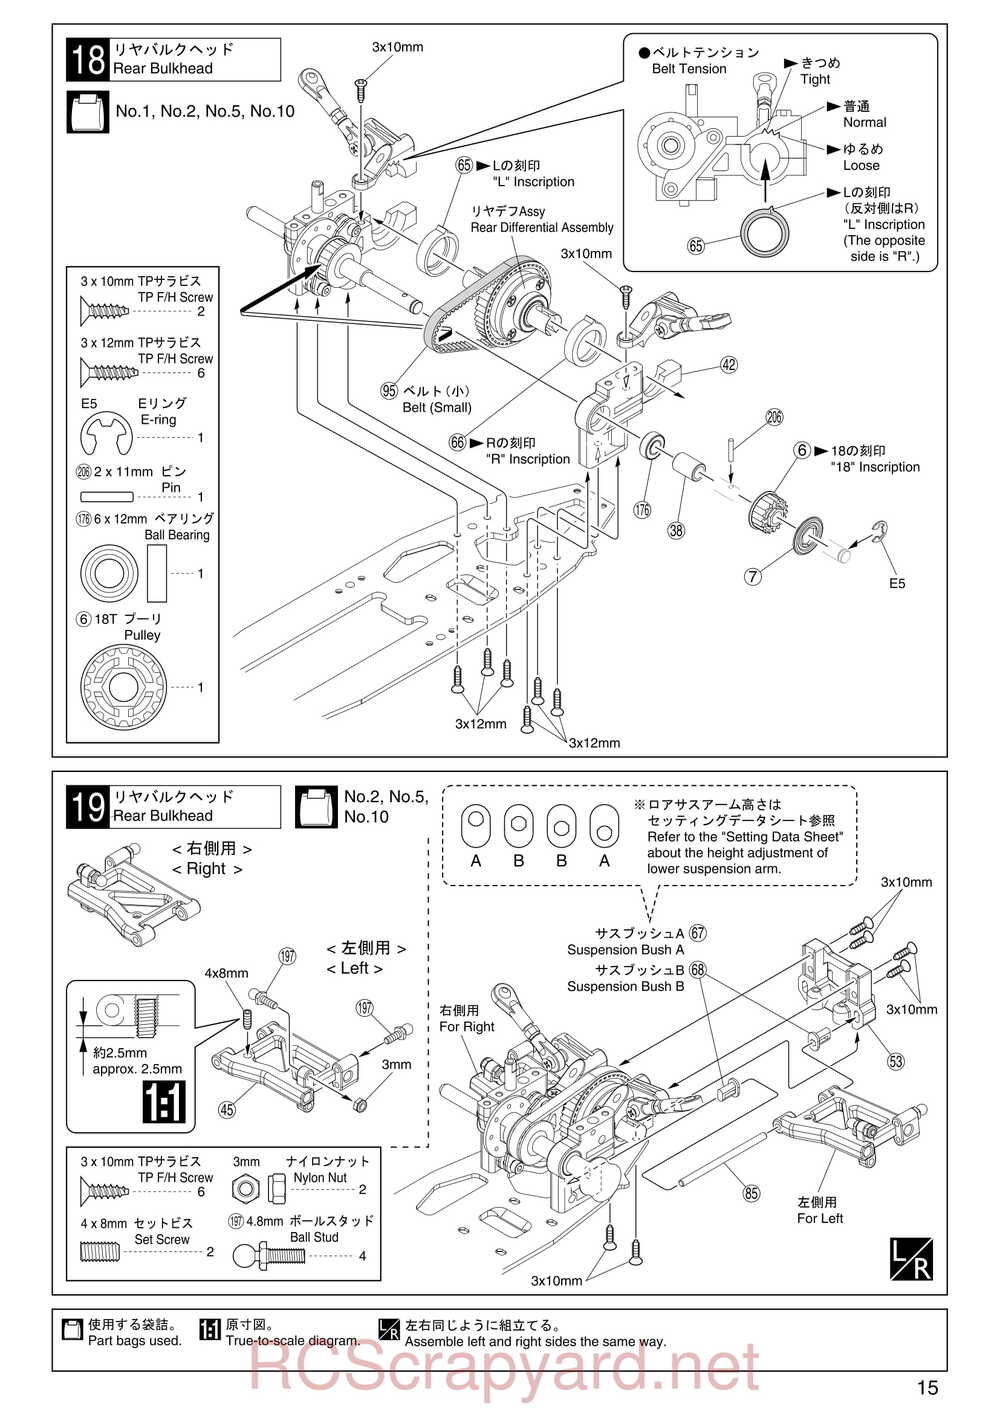 Kyosho - 31257 - V-One RRR Rubber - Manual - Page 15